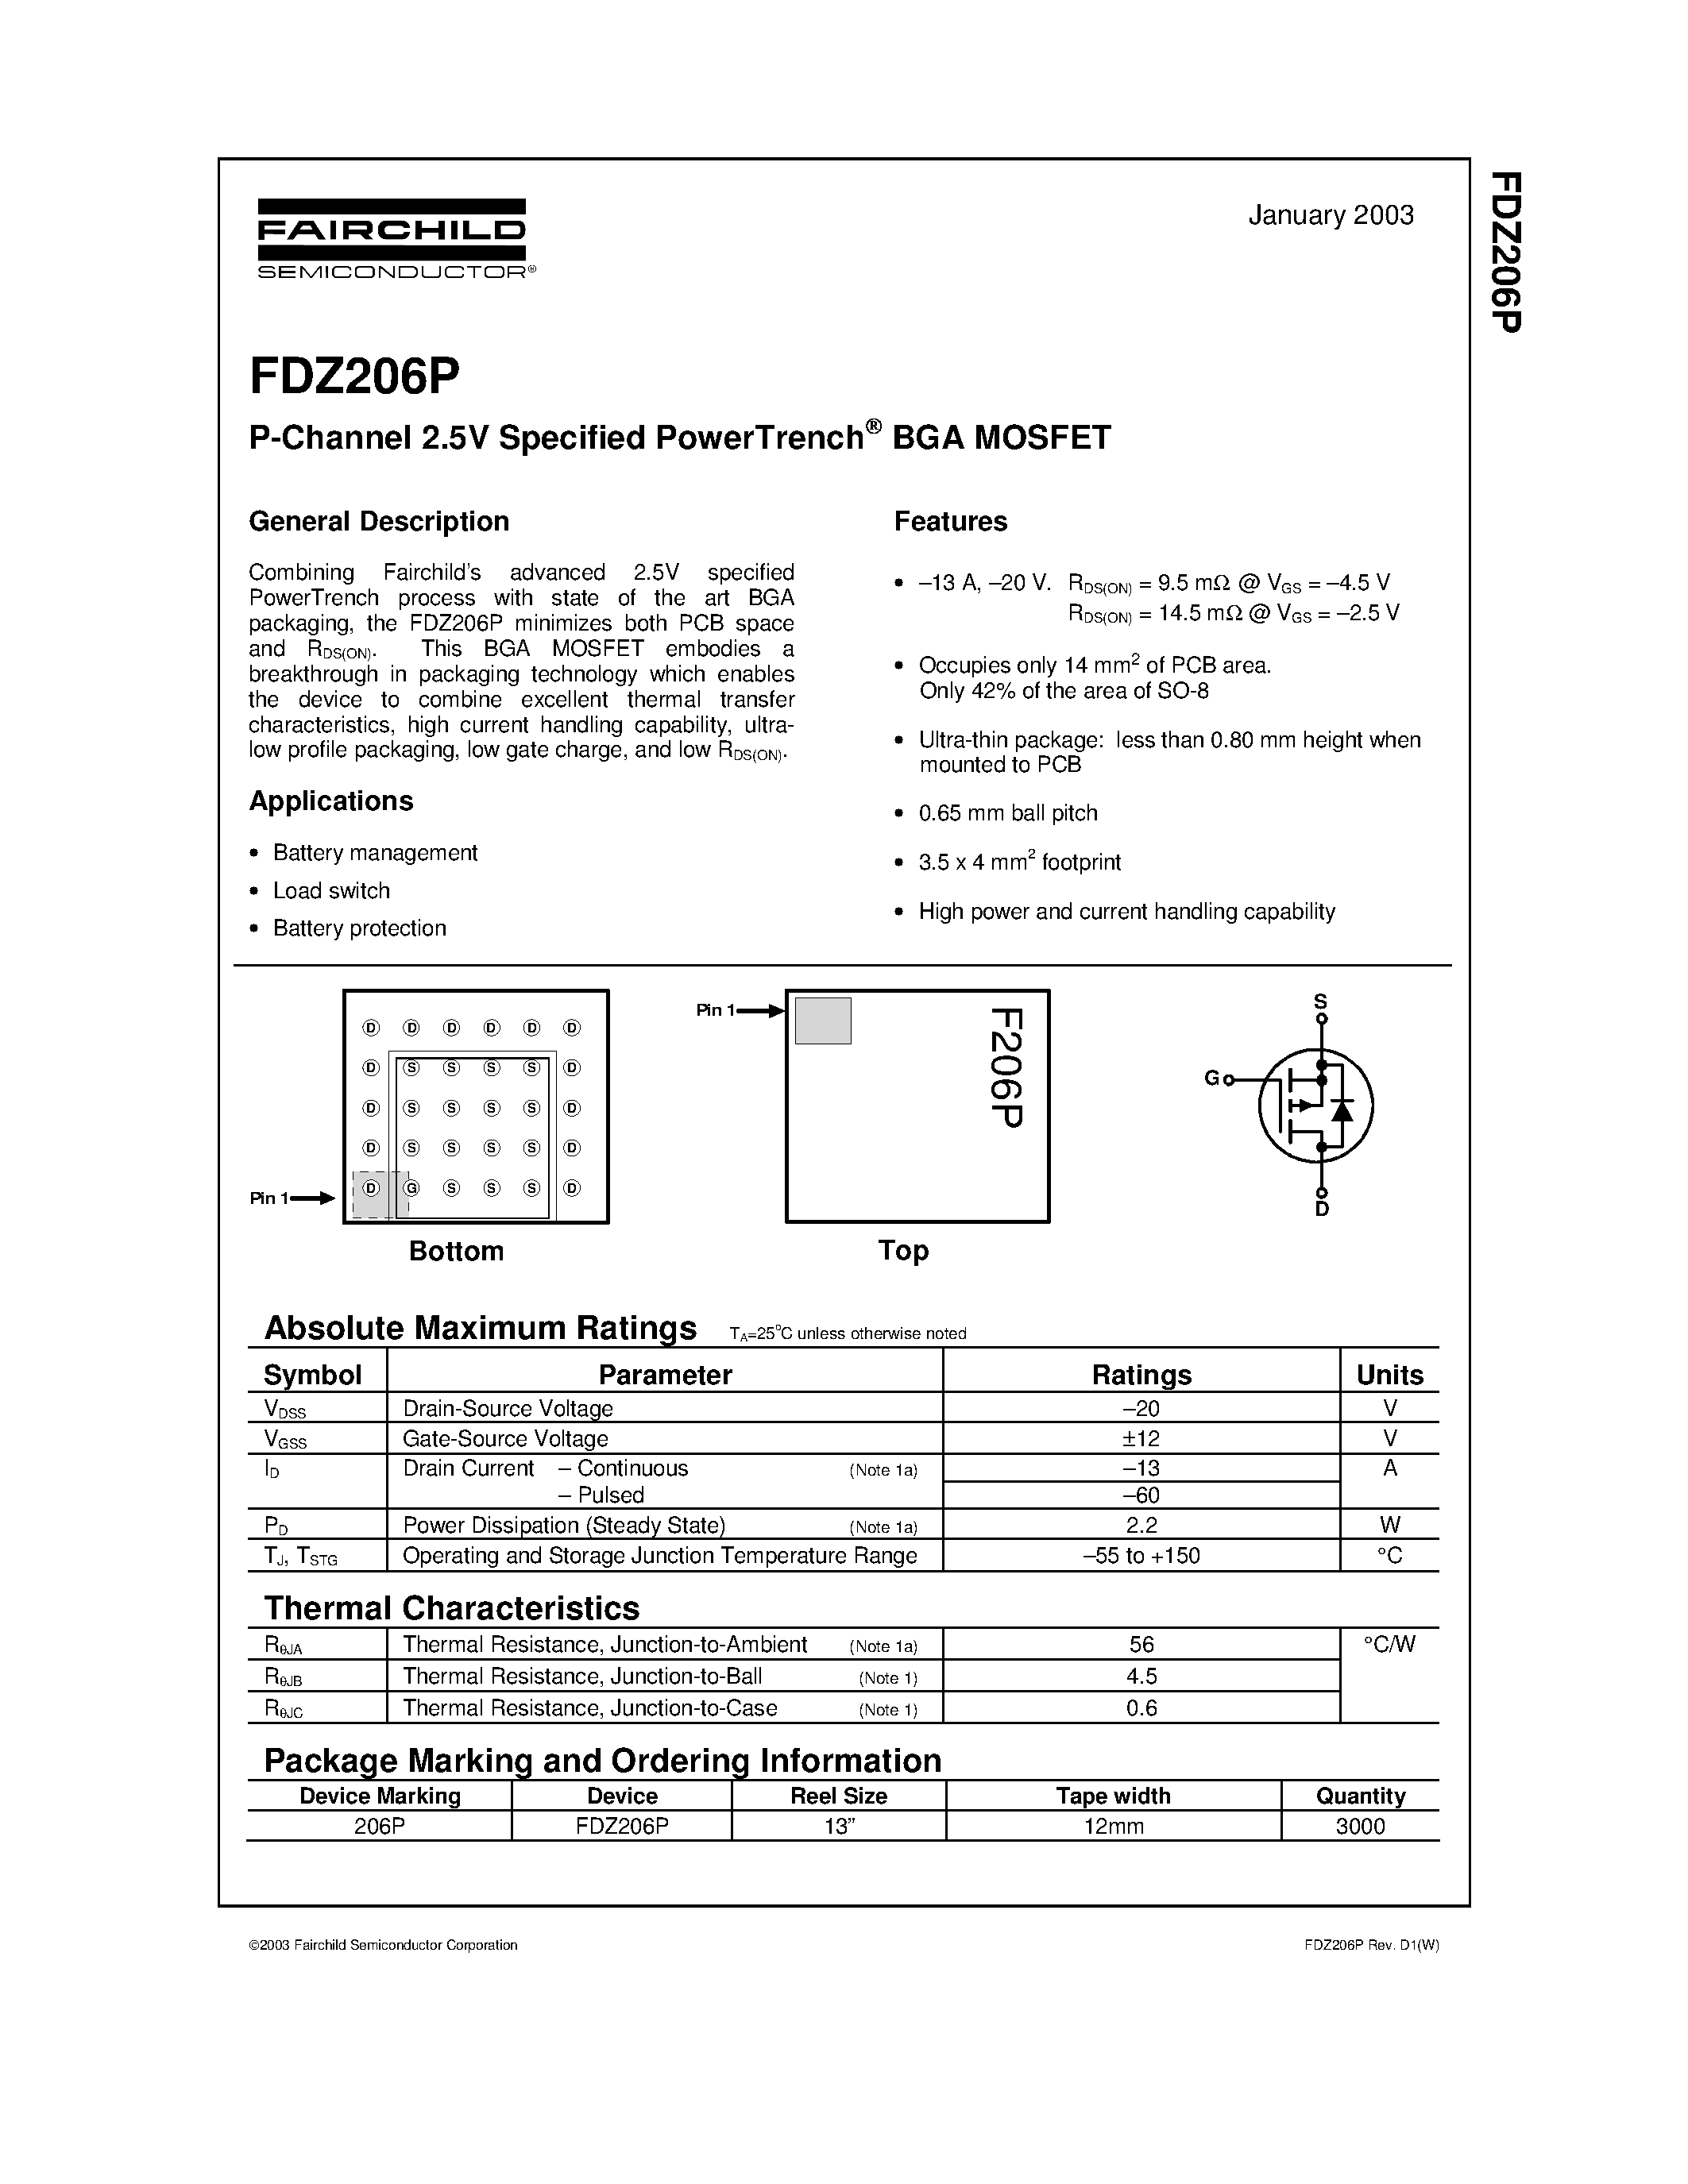 Даташит FDZ206P - P-Channel 2.5V Specified PowerTrench страница 1